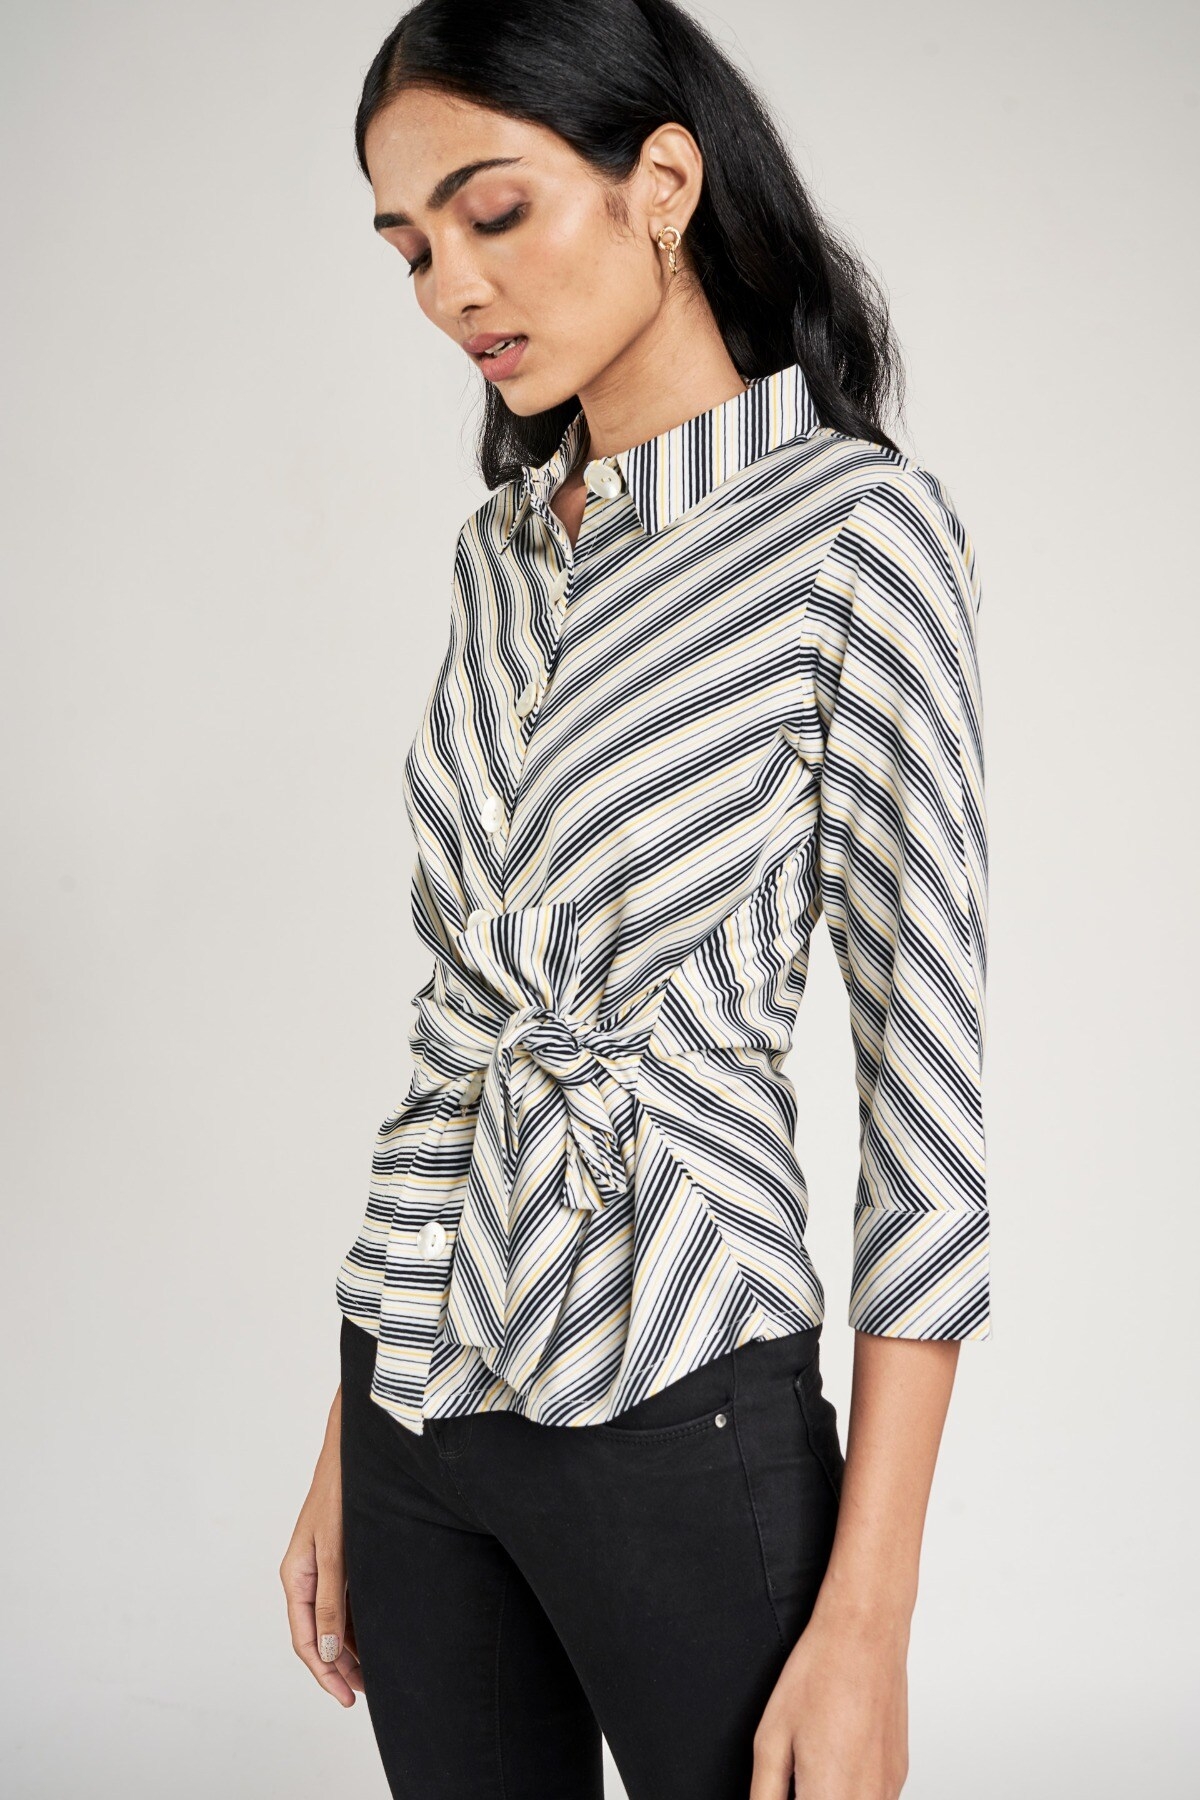 AND | Black and White Striped Printed Fit And Flare Top 4